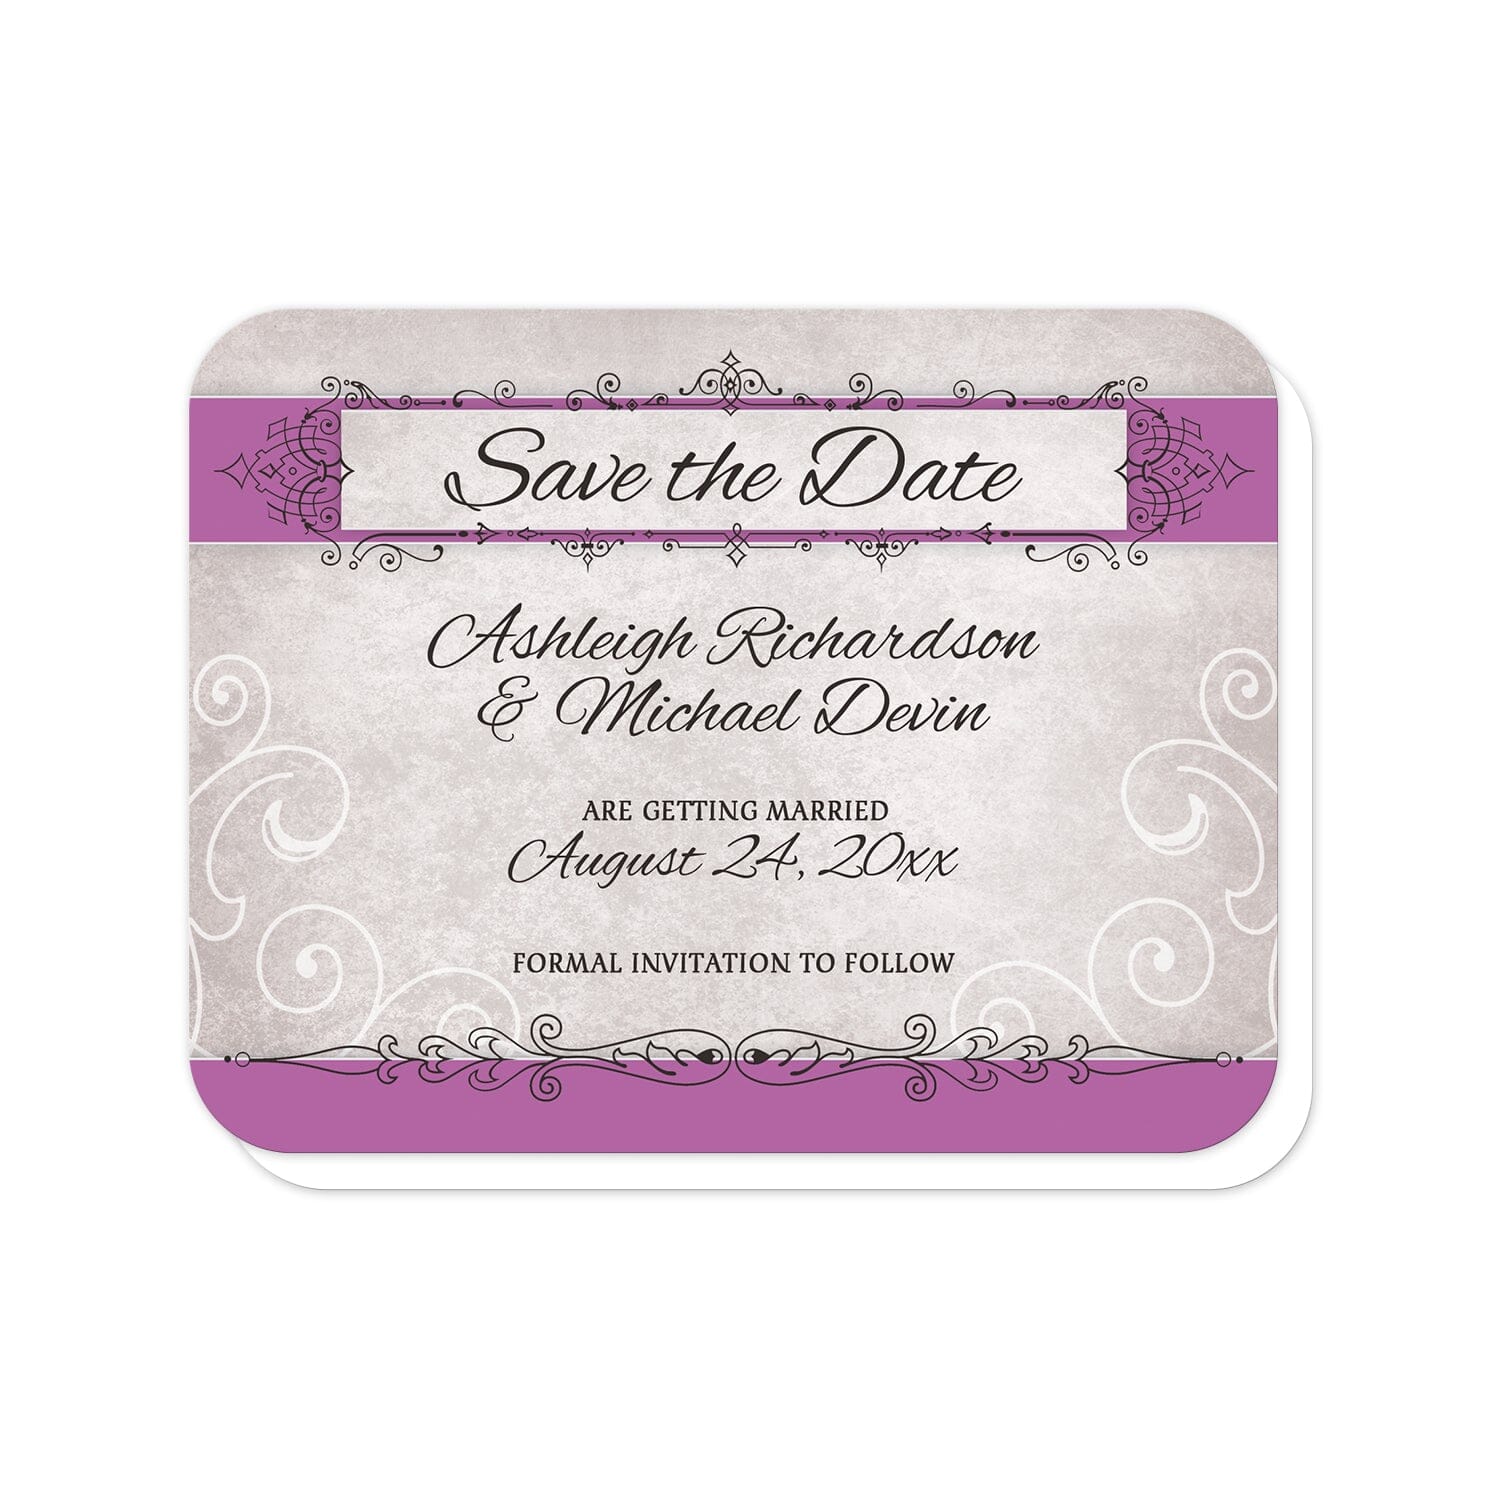 Vintage Orchid Purple Ornate Save the Date Cards (with rounded corners) at Artistically Invited. Pretty vintage orchid purple ornate save the date cards elegant purple orchid stripes with ornate black flourish frames and lines over them on a vintage grayish weathered background with white line flourishes. Your personalized wedding date details are custom printed in black between the purple stripes over the gray background. 